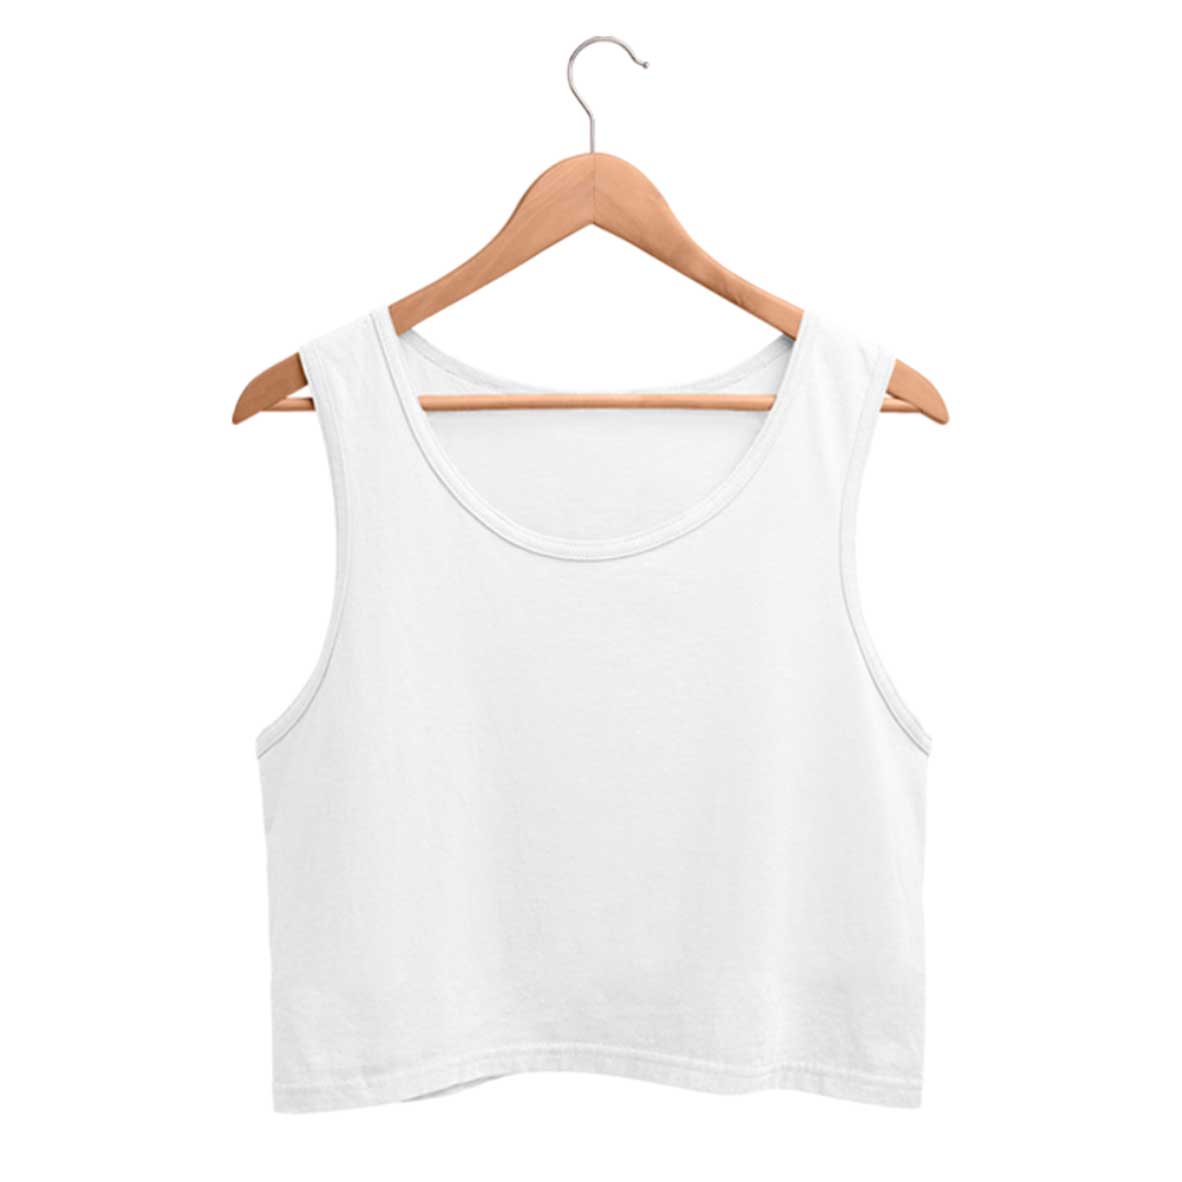 crop tank tops white crop tank top the banyan tee tbt basics  for girls for women for gym